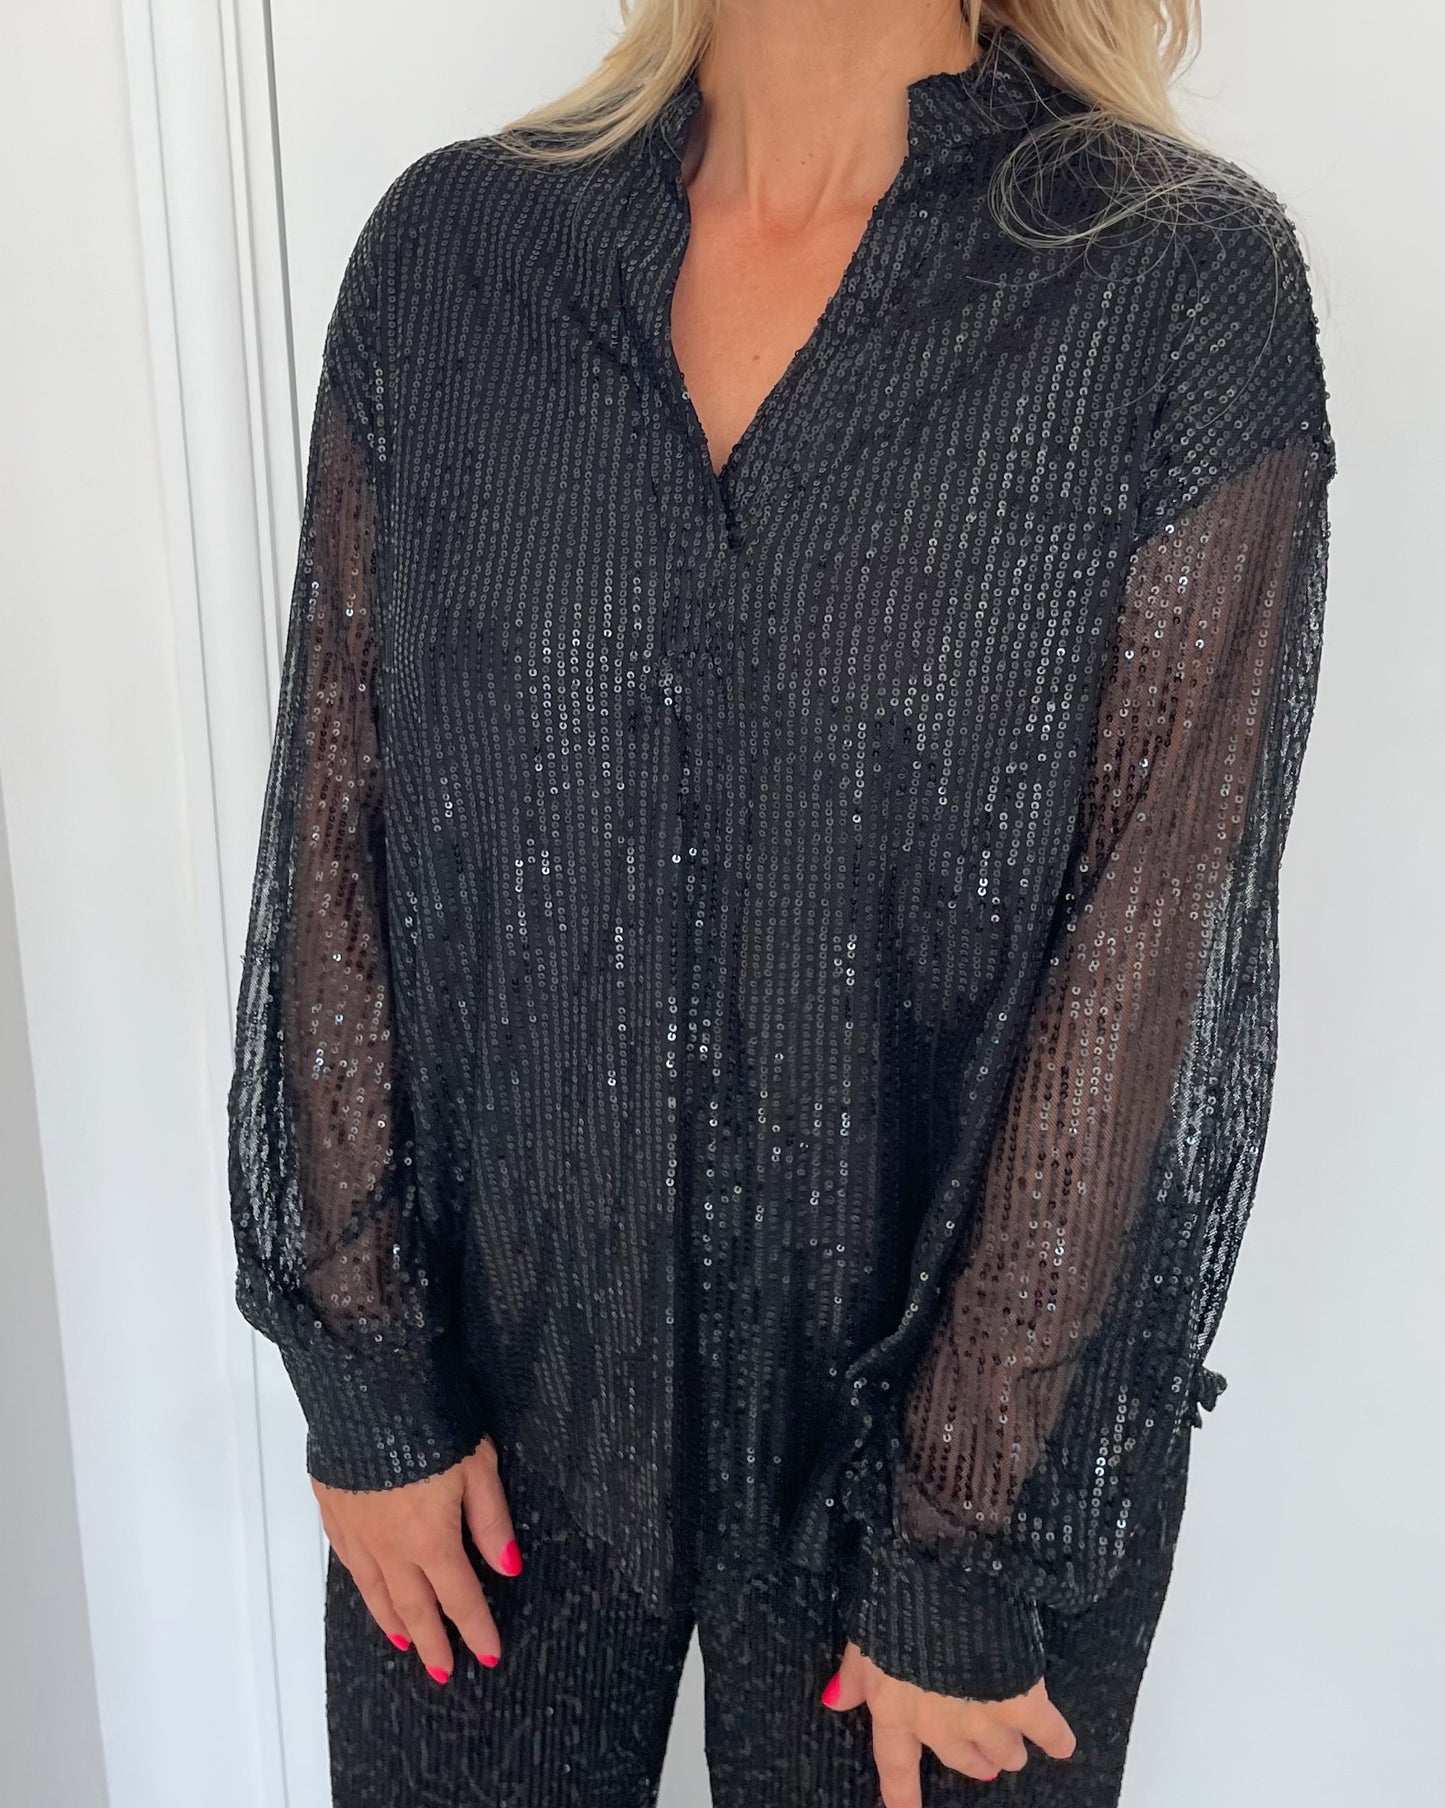 Sequin Collared Shirt in Black